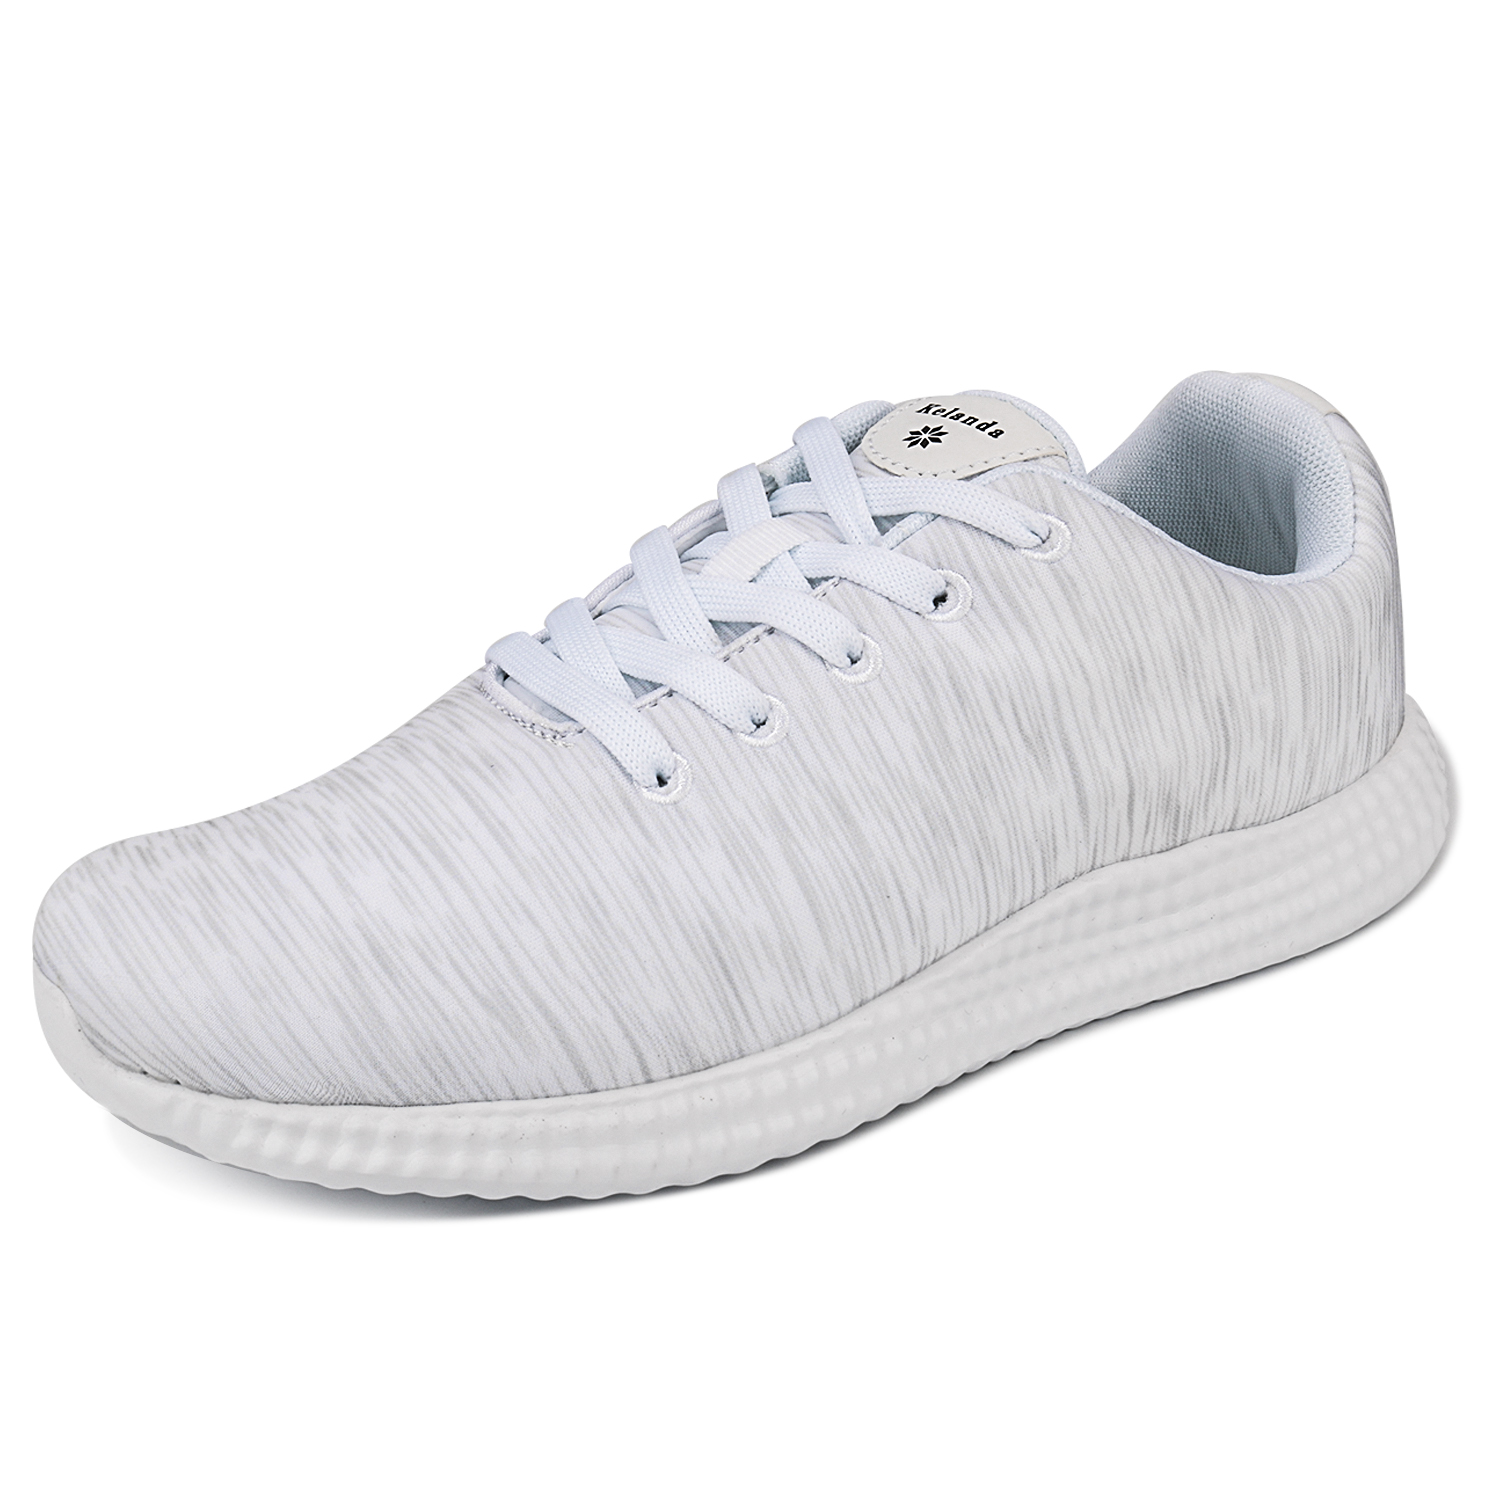 Special Price sports casual shoes men